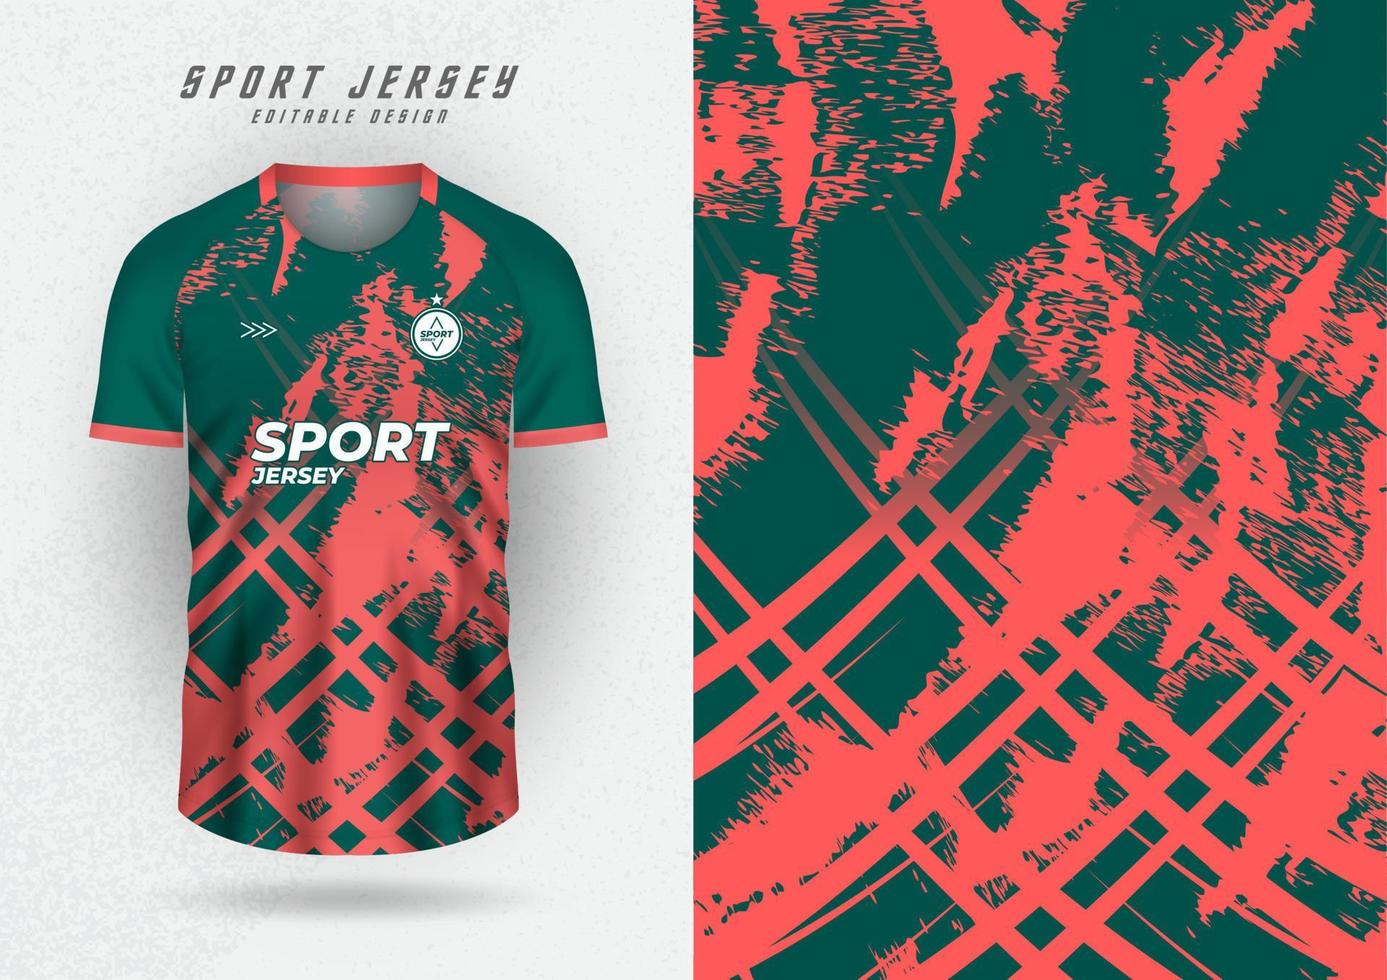 Background mockup for sports team jerseys, jerseys, running jerseys, green background with pink patterns. vector